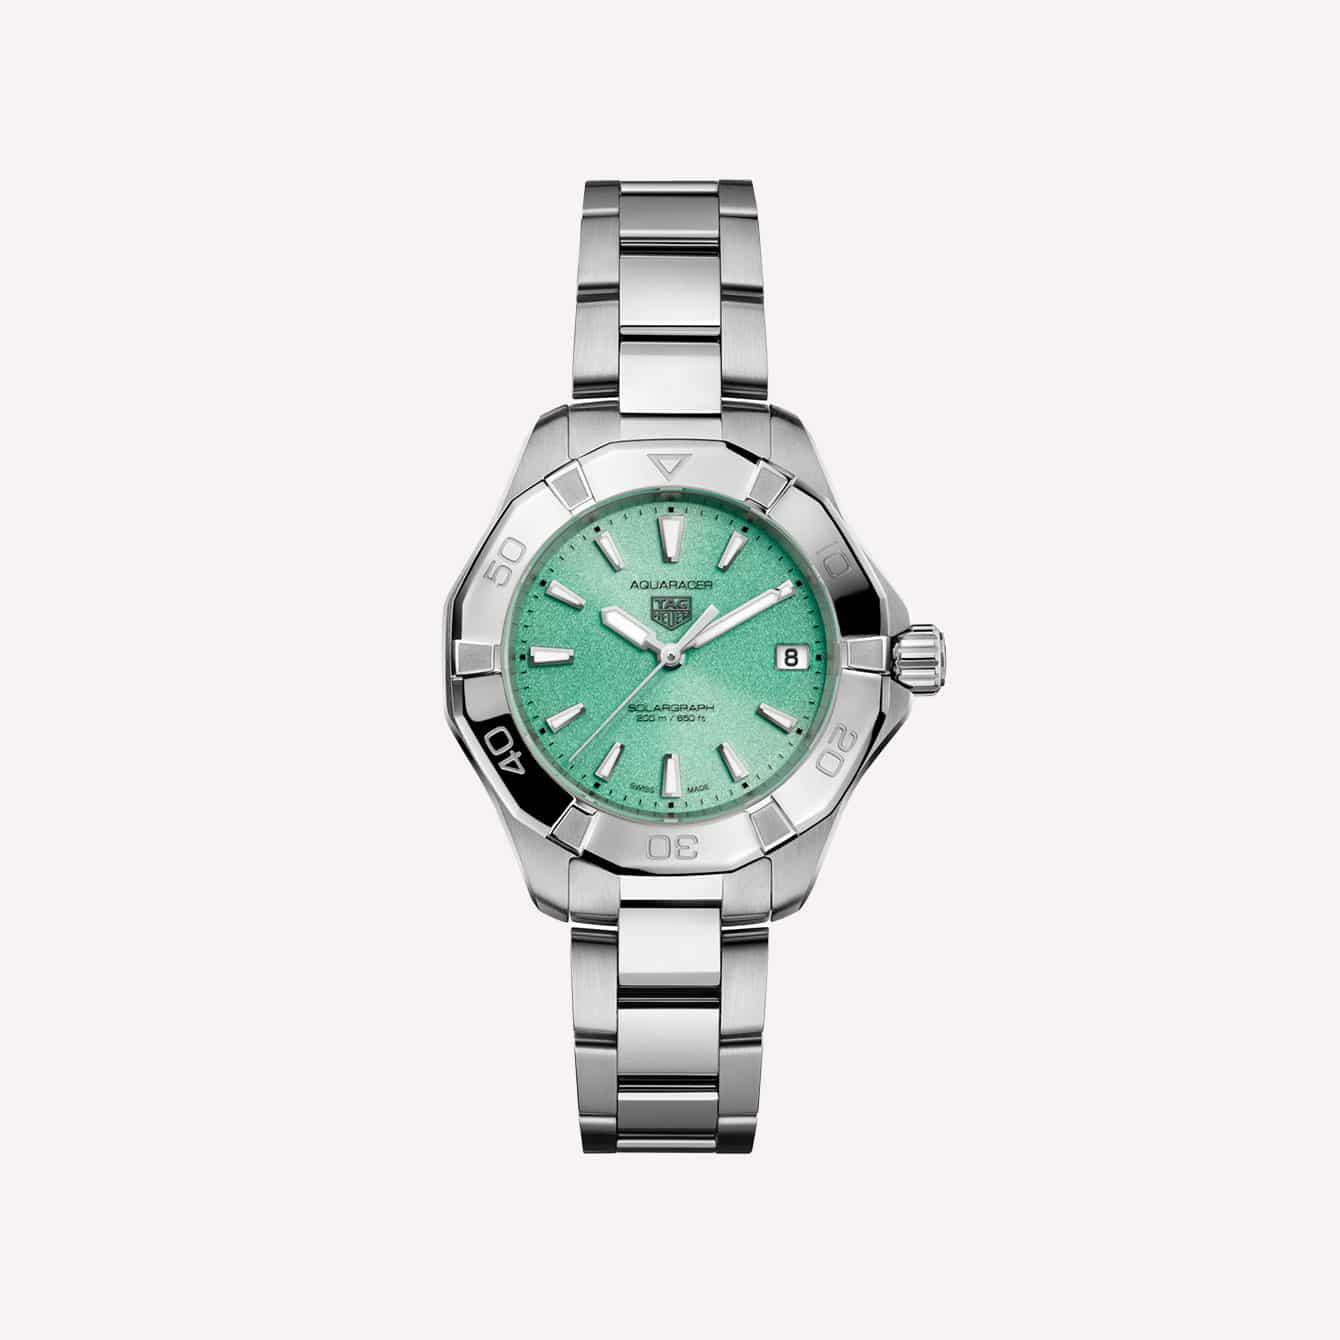 The New Green TAG Heuer Watches Unwrapped-2